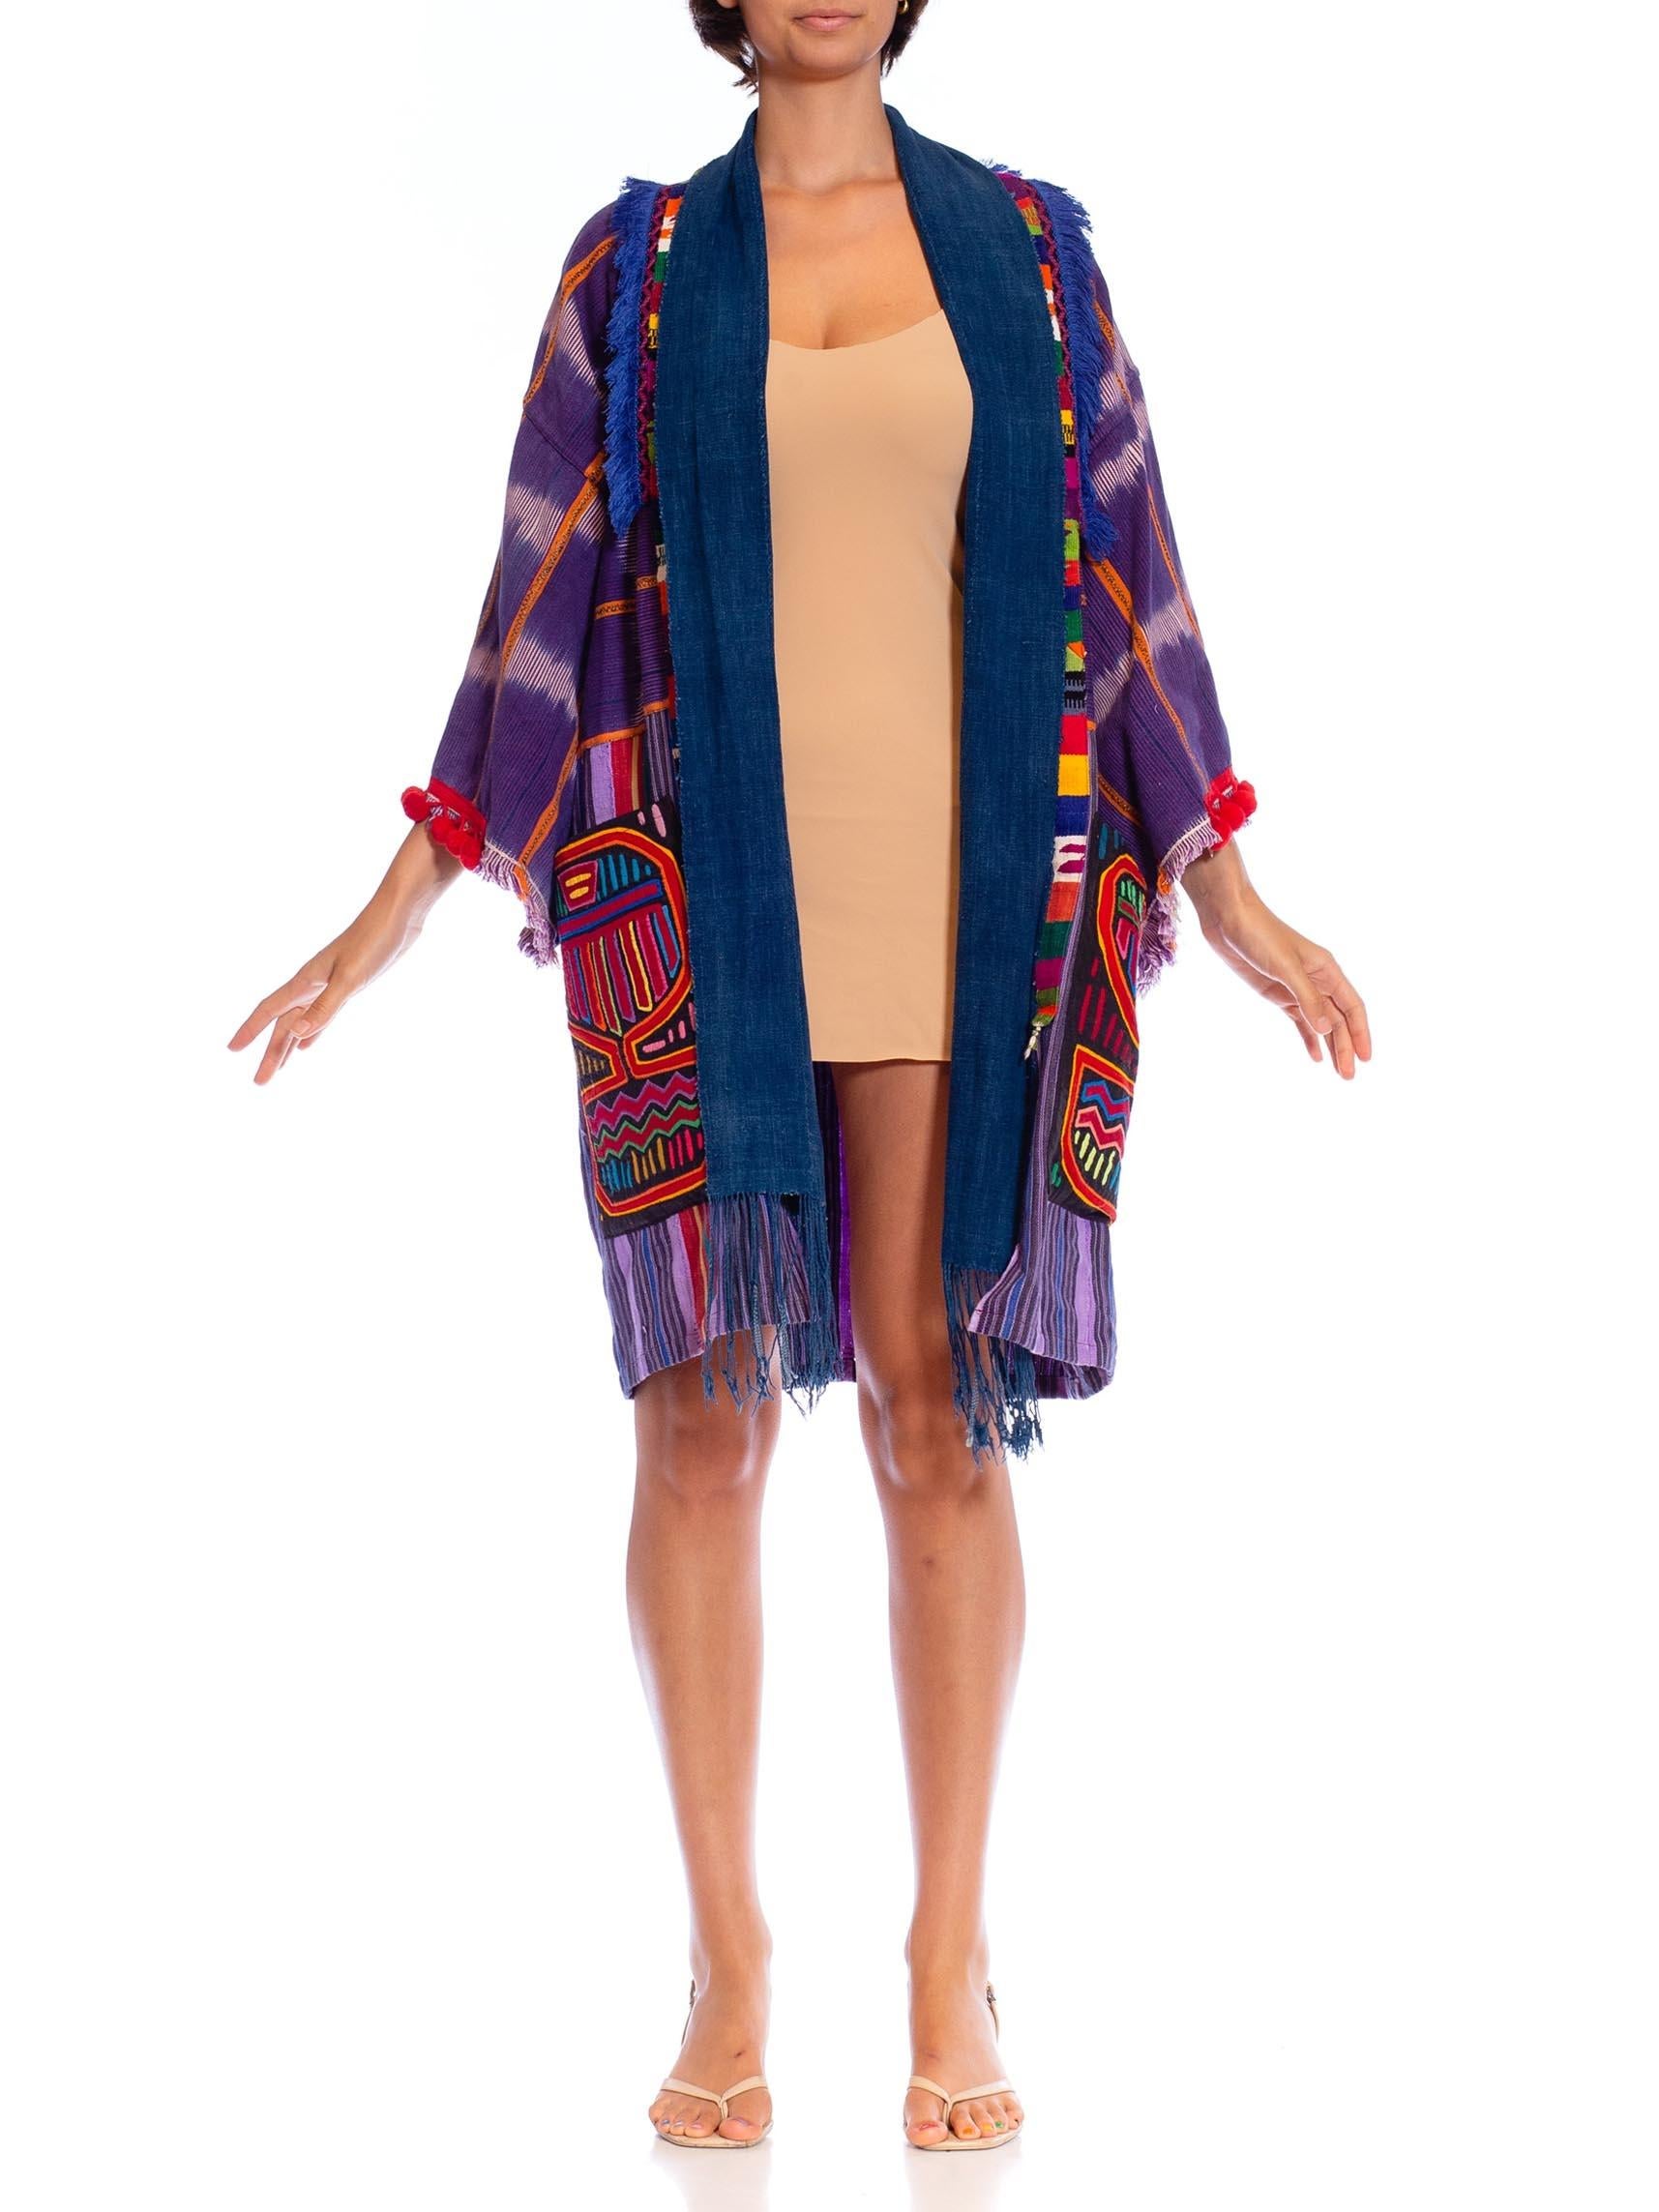 Morphew Collection Purple African Indigo Unisex Duster Beach Coat With South American Hand Done Detailing
MORPHEW COLLECTION is made entirely by hand in our NYC Ateliér of rare antique materials sourced from around the globe. Our sustainable vintage